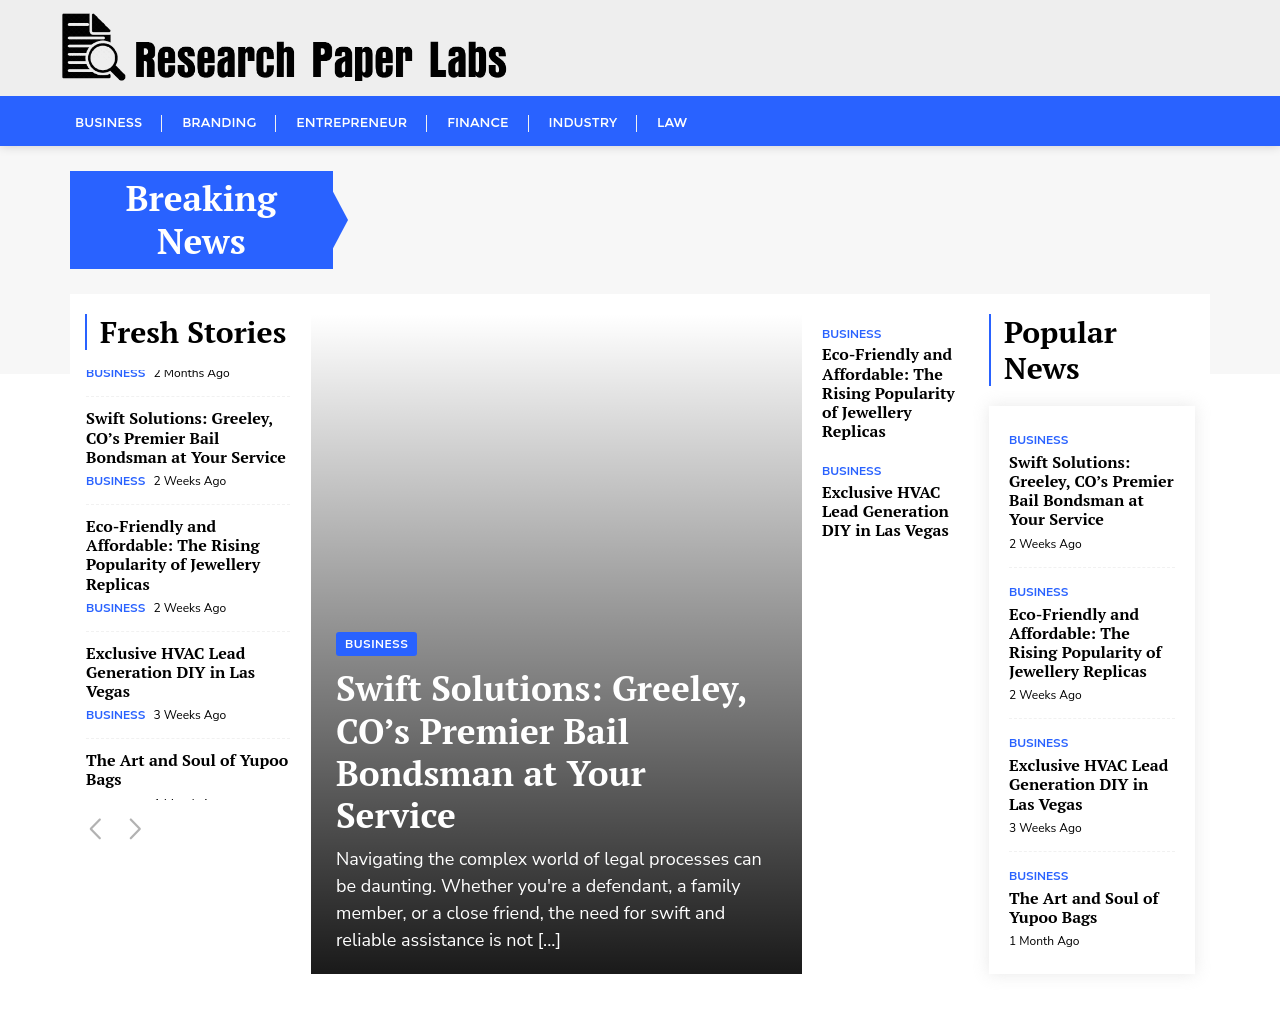 researchpaperlabs.com